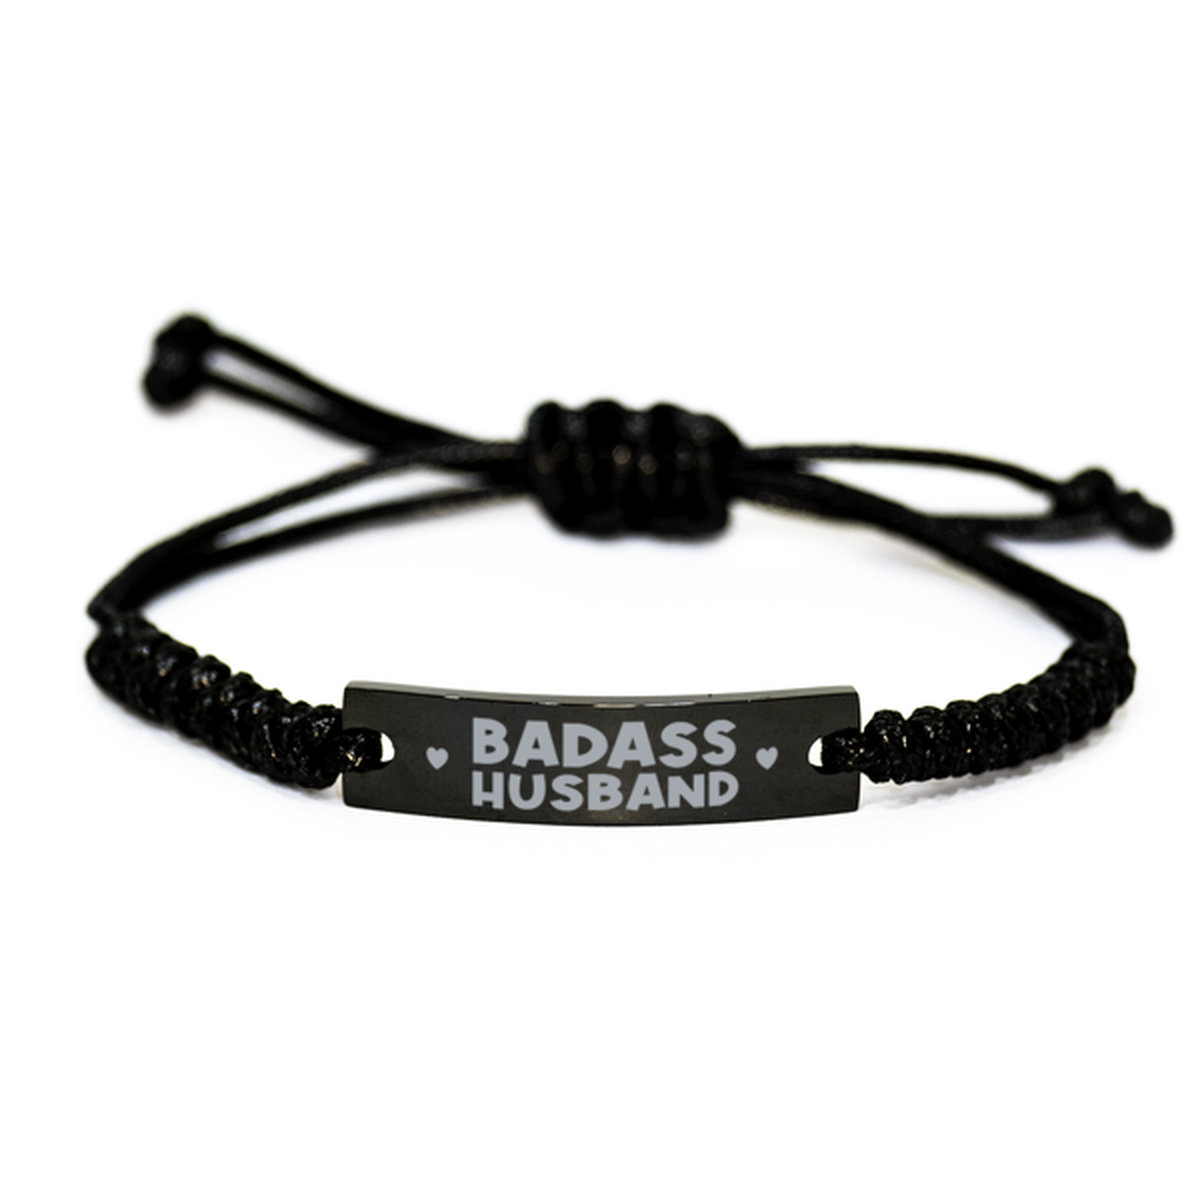 Husband Rope Bracelet, Badass Husband, Funny Family Gifts For Husband From Wife